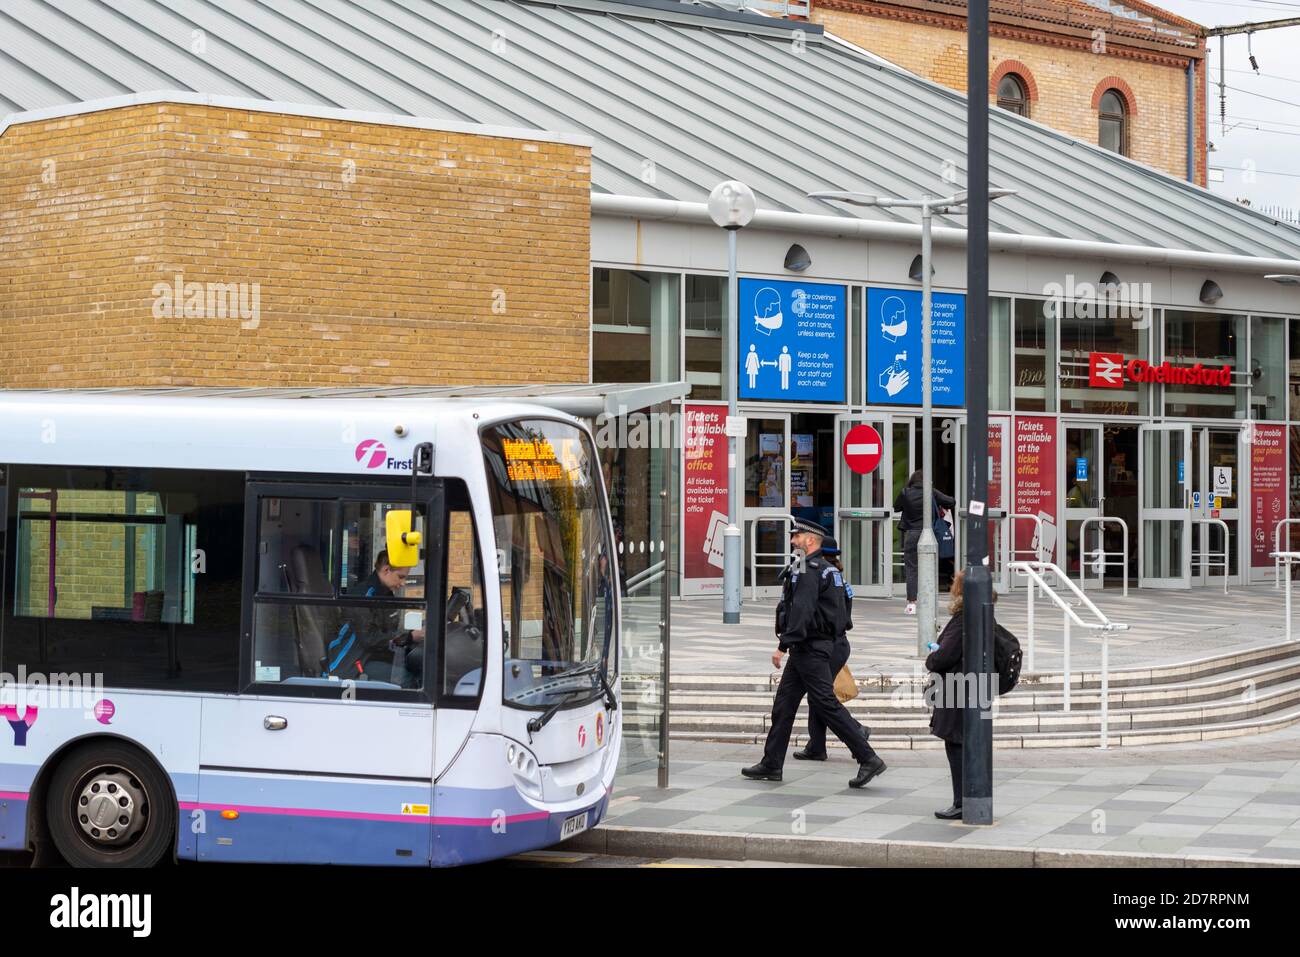 FirstGroup, FirstBus, First bus outside Chelmsford railway station, Essex, UK. Transport hub. Police officer and COVID 19 health warnings Stock Photo